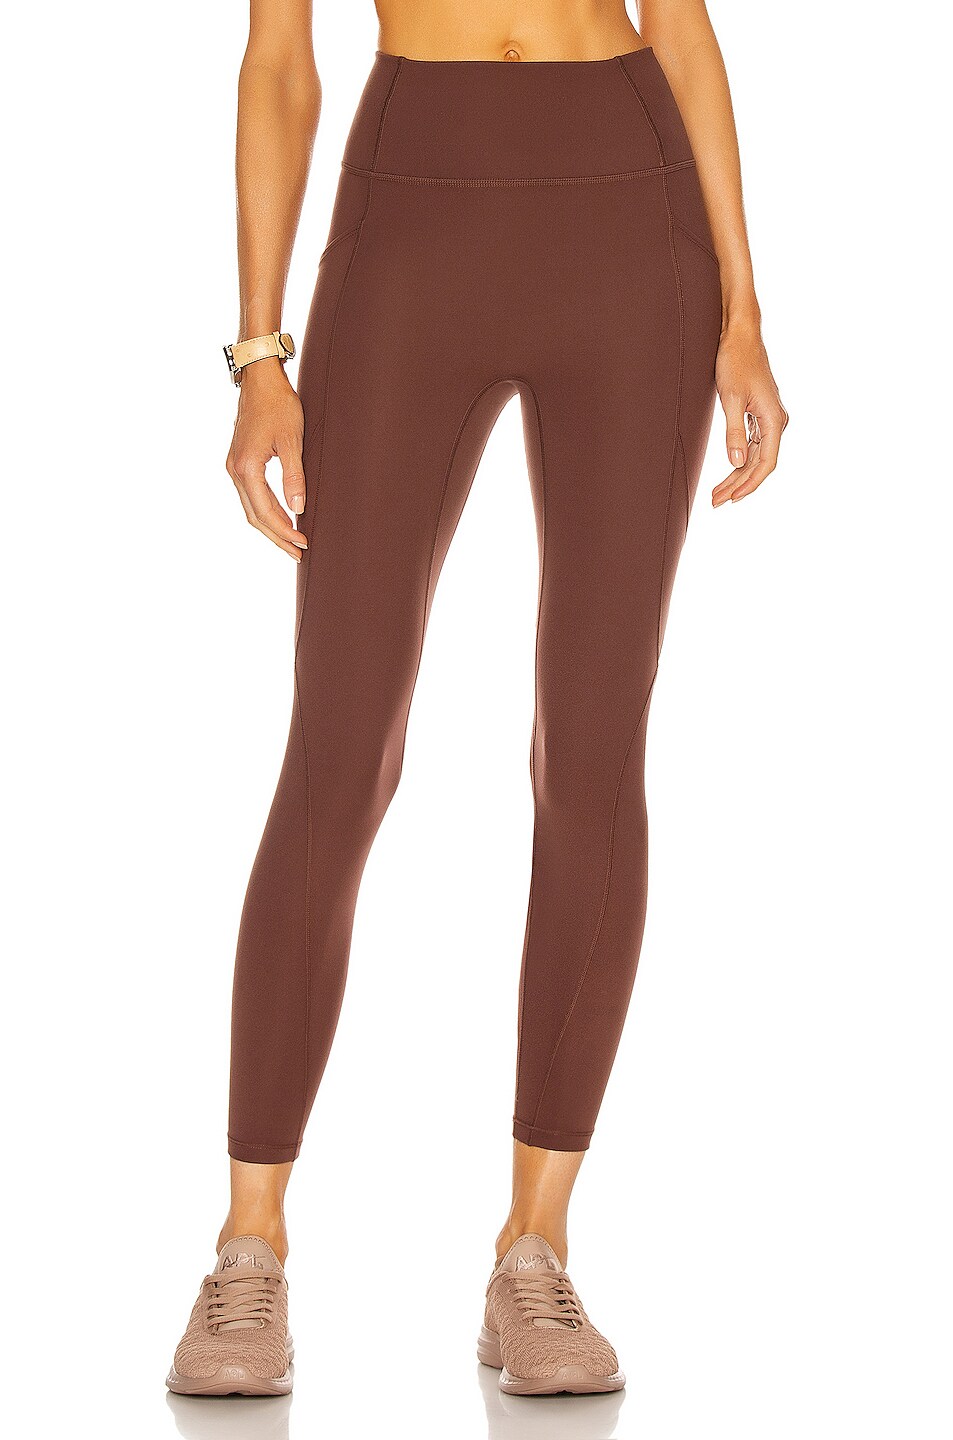 Image 1 of Le Ore Lucca High Rise Pocket Legging in Truffle